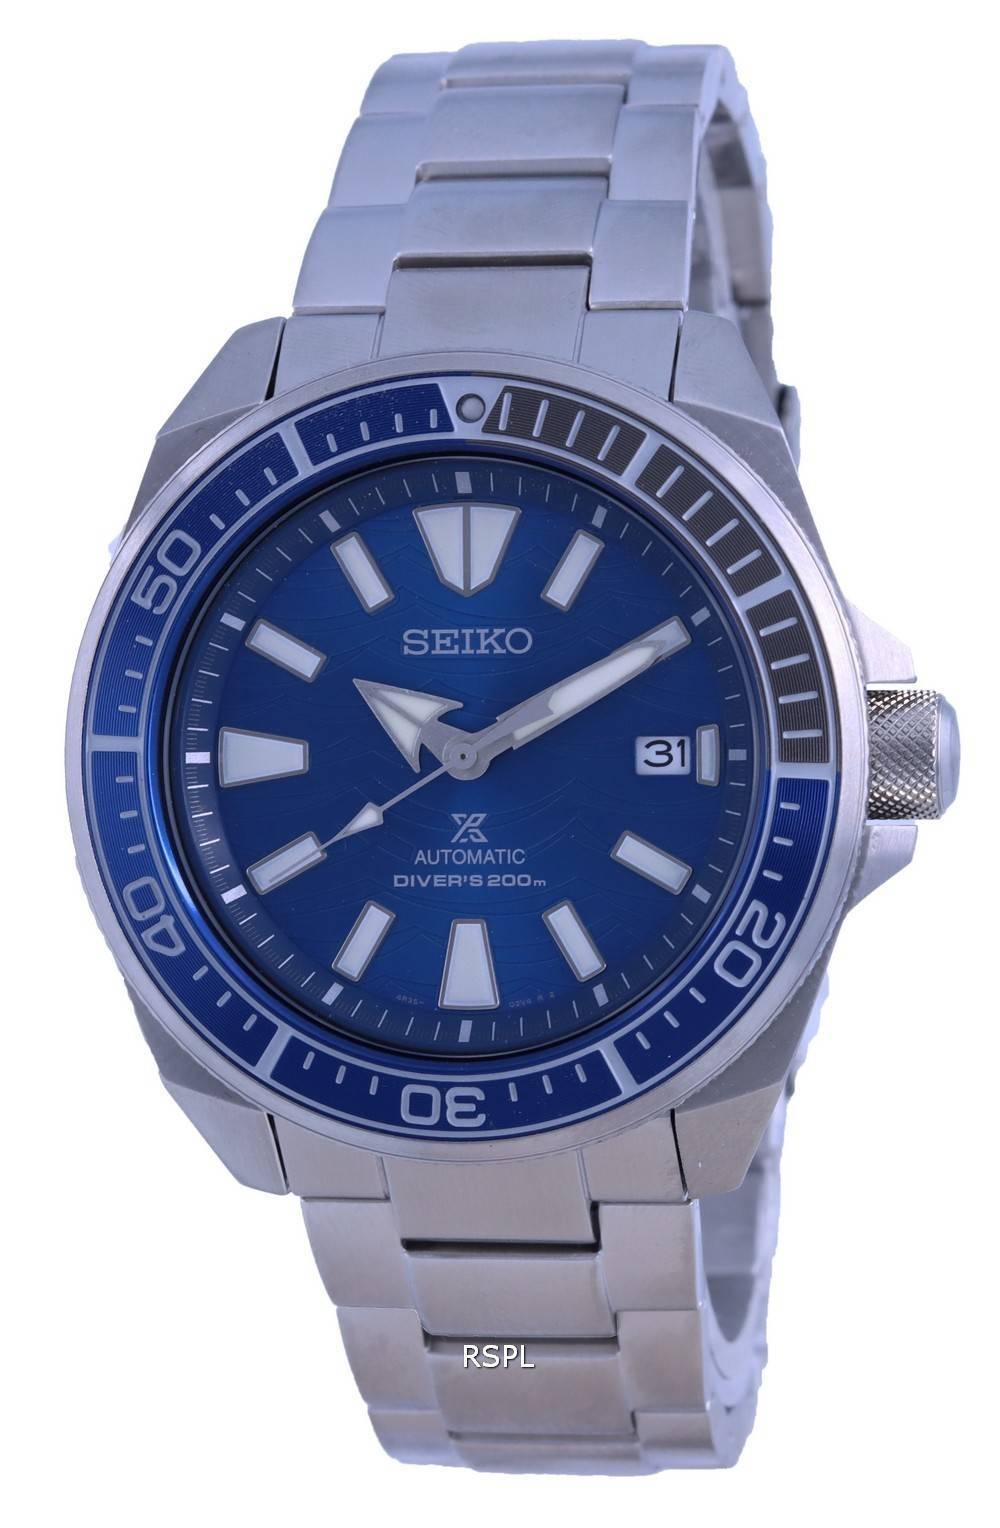 Seiko Prospex Ocean Special Edition Divers Automatic SRPD23 SRPD23K1 SRPD23K 200M Watch - Citywatches.ae